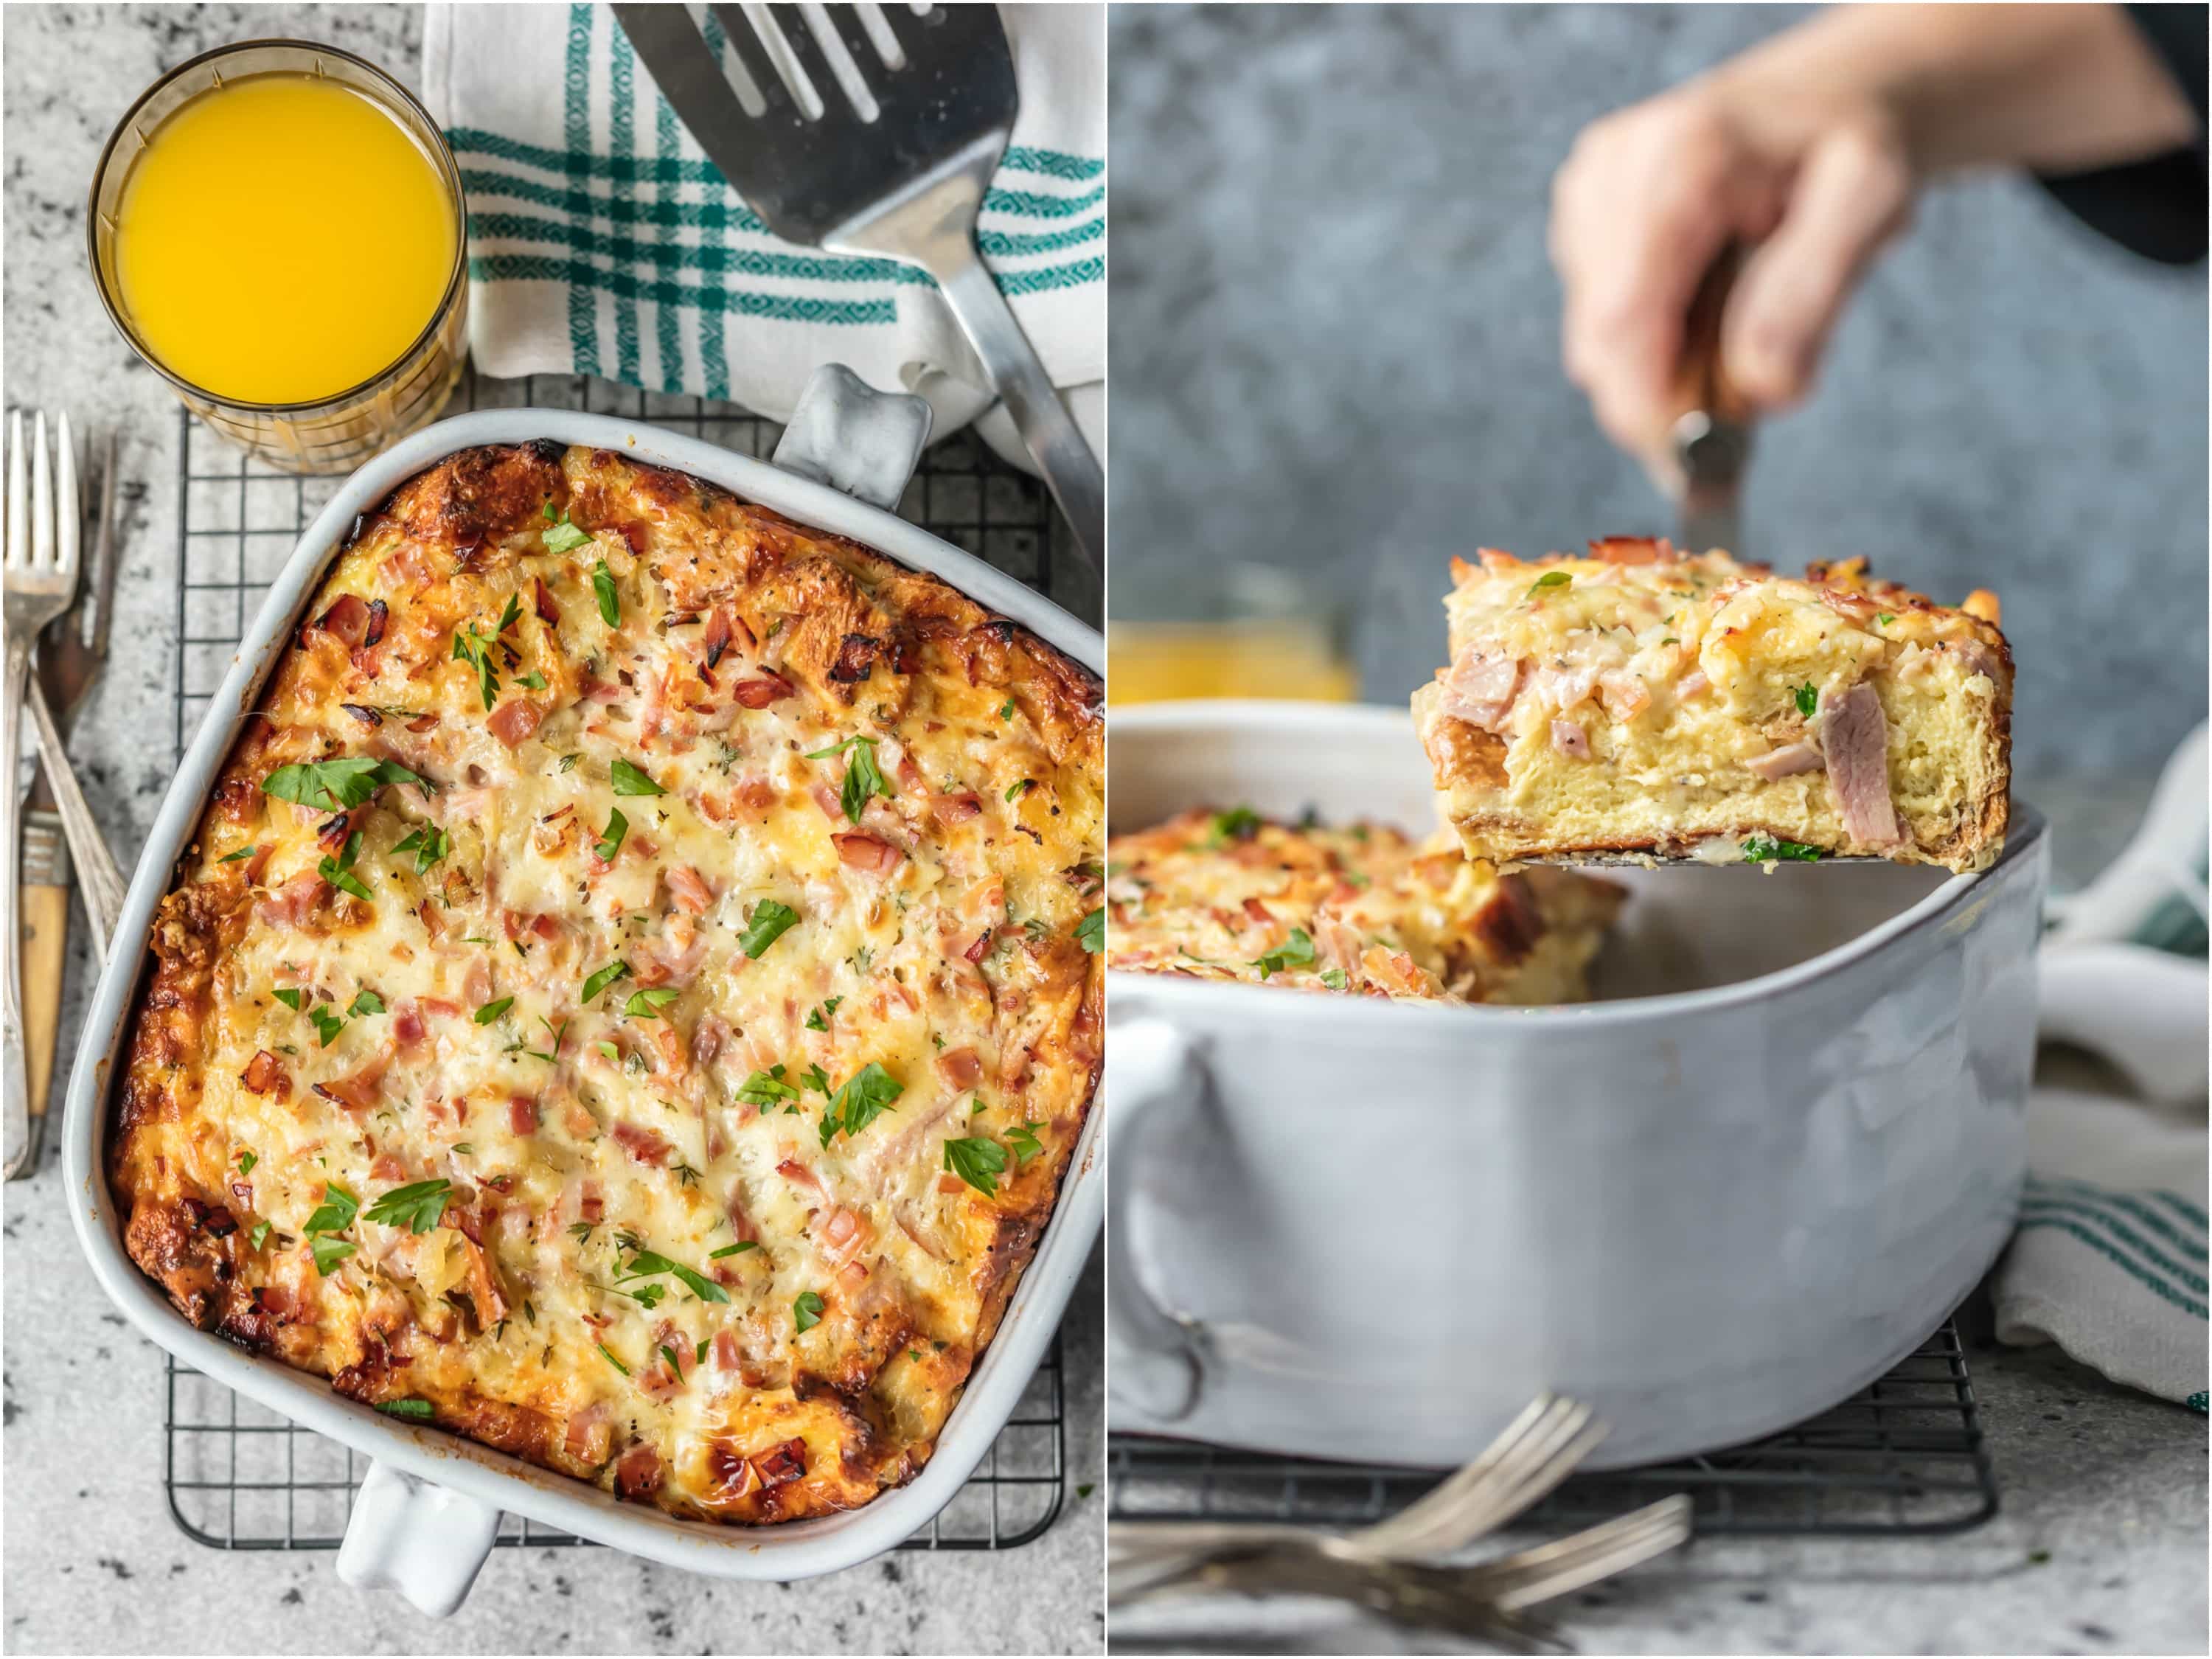 This HAM AND CHEESE BREAKFAST CASSEROLE is our favorite make ahead breakfast for any special occasion. Loaded with ham, cheese, , bread, eggs, herbs, and more! Sure to please everyone and just so easy to make!